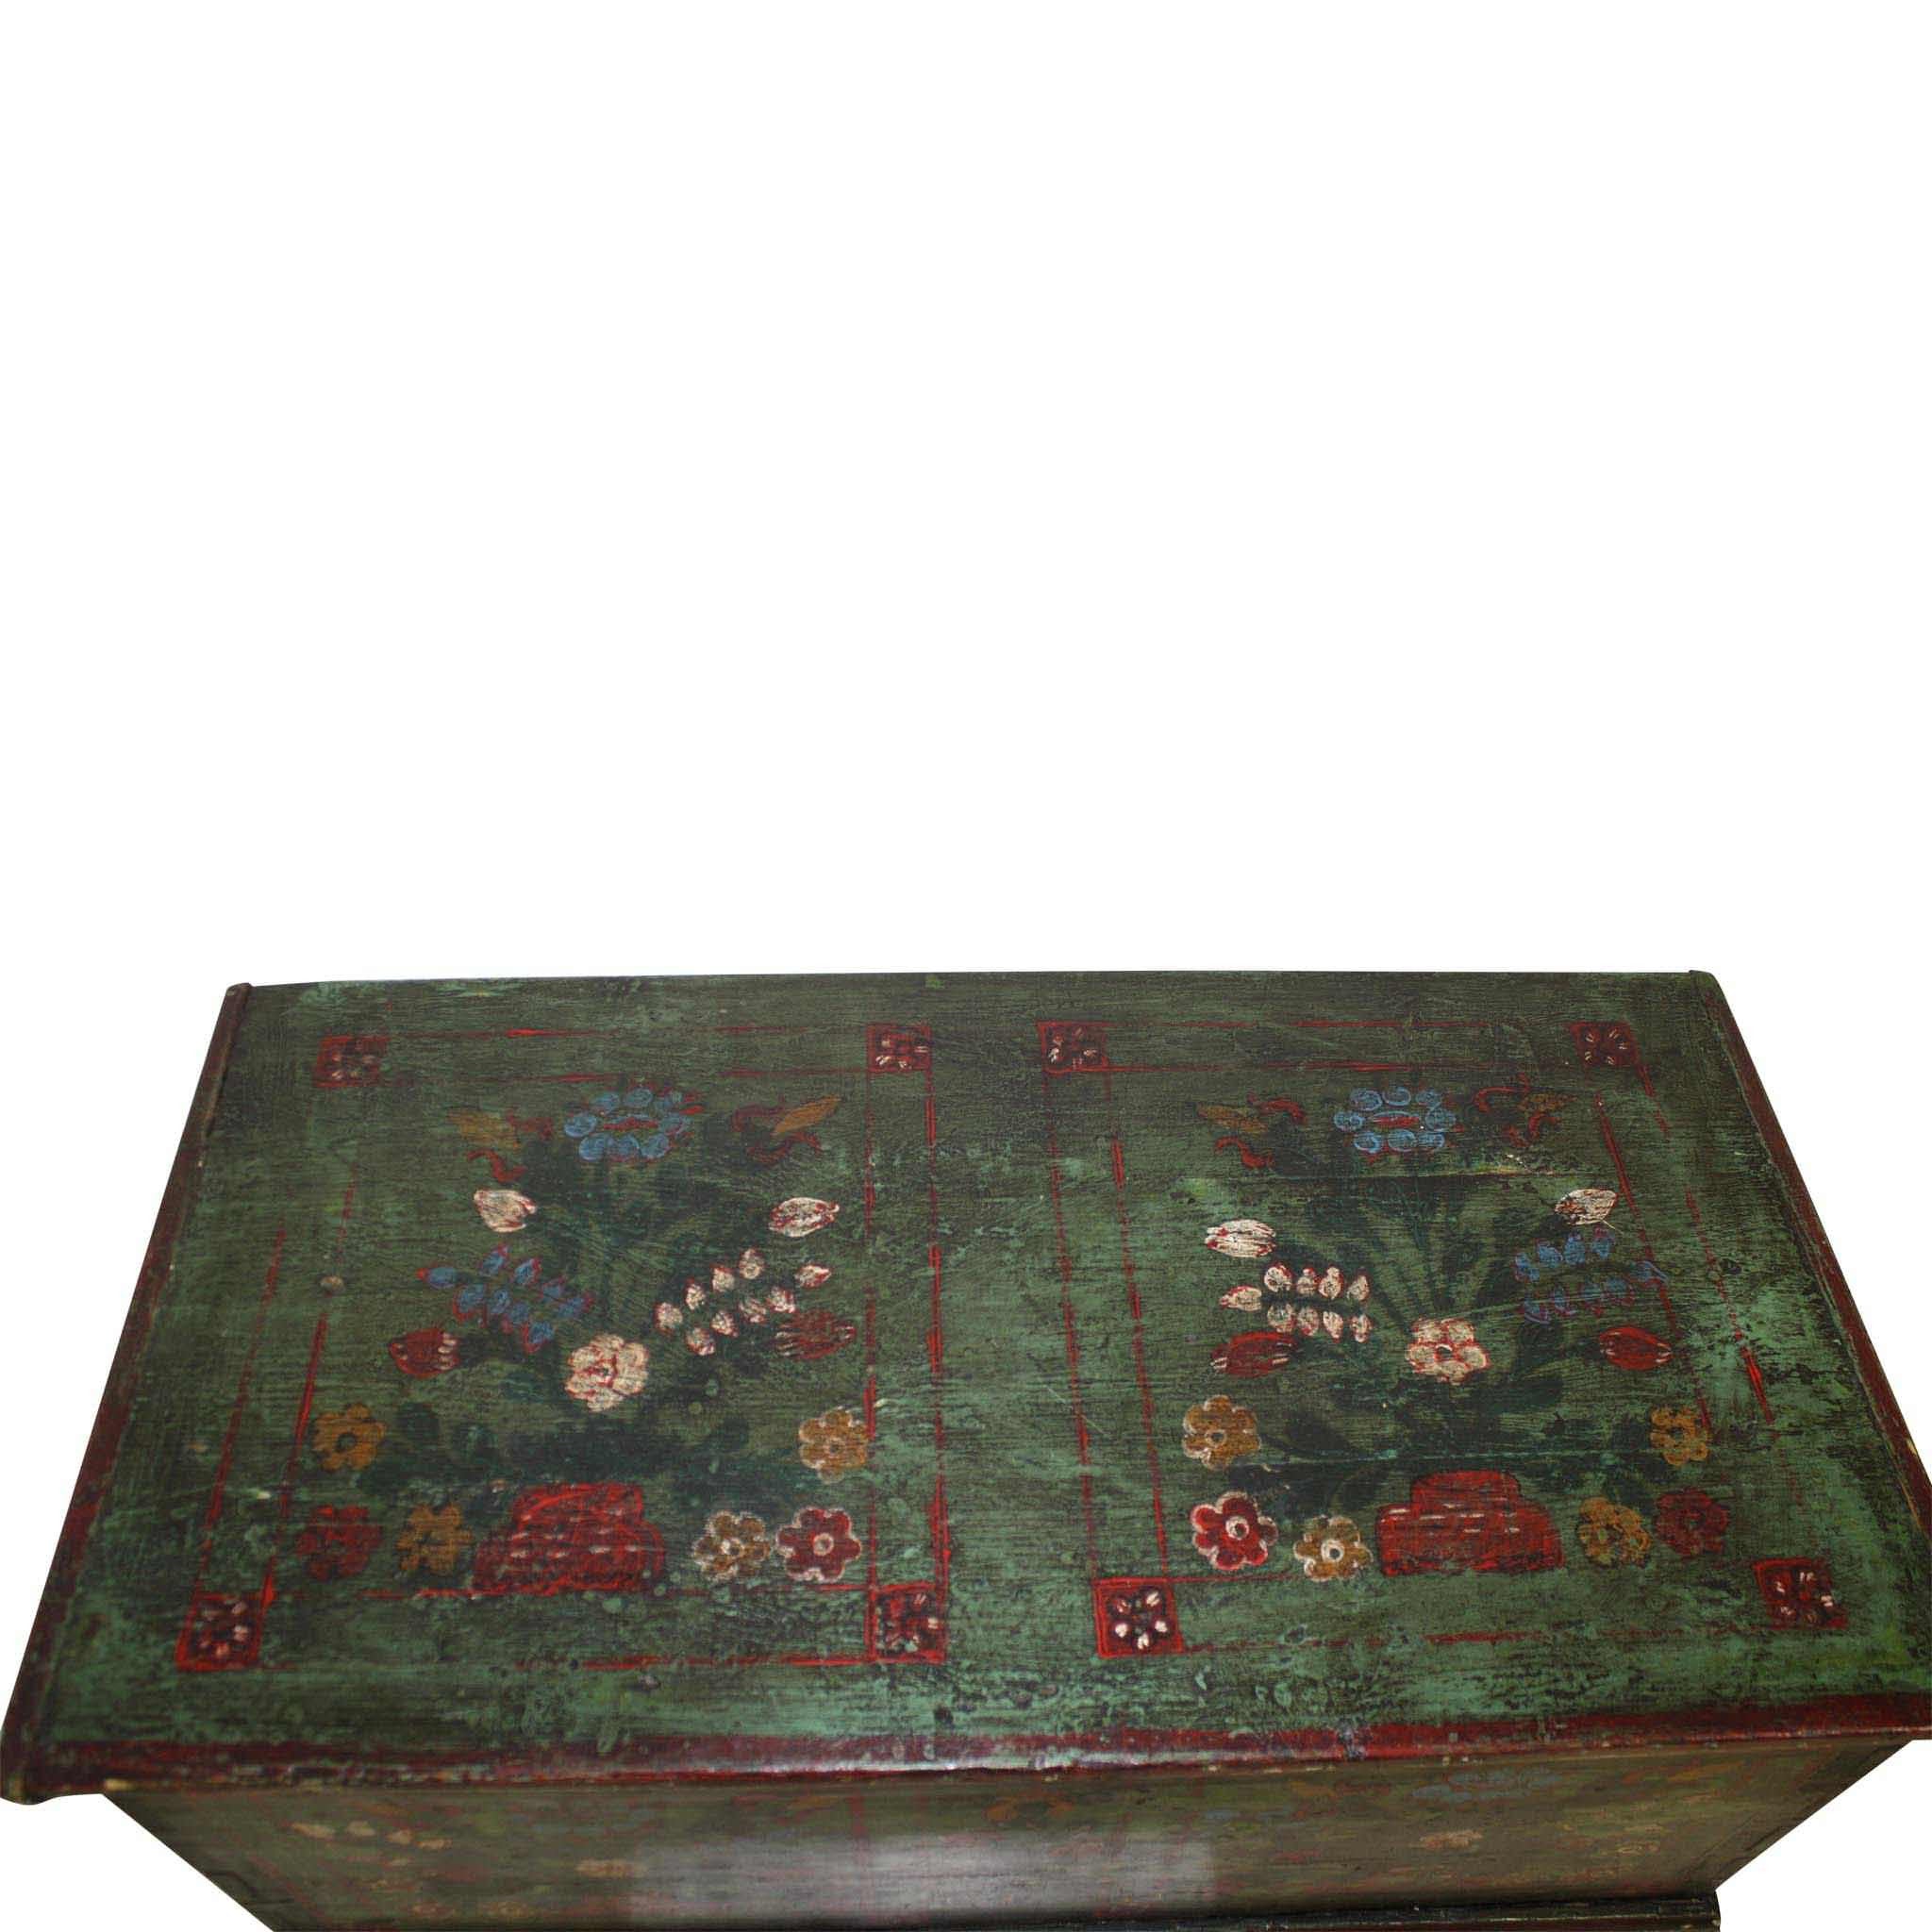 Painted Hope Chest